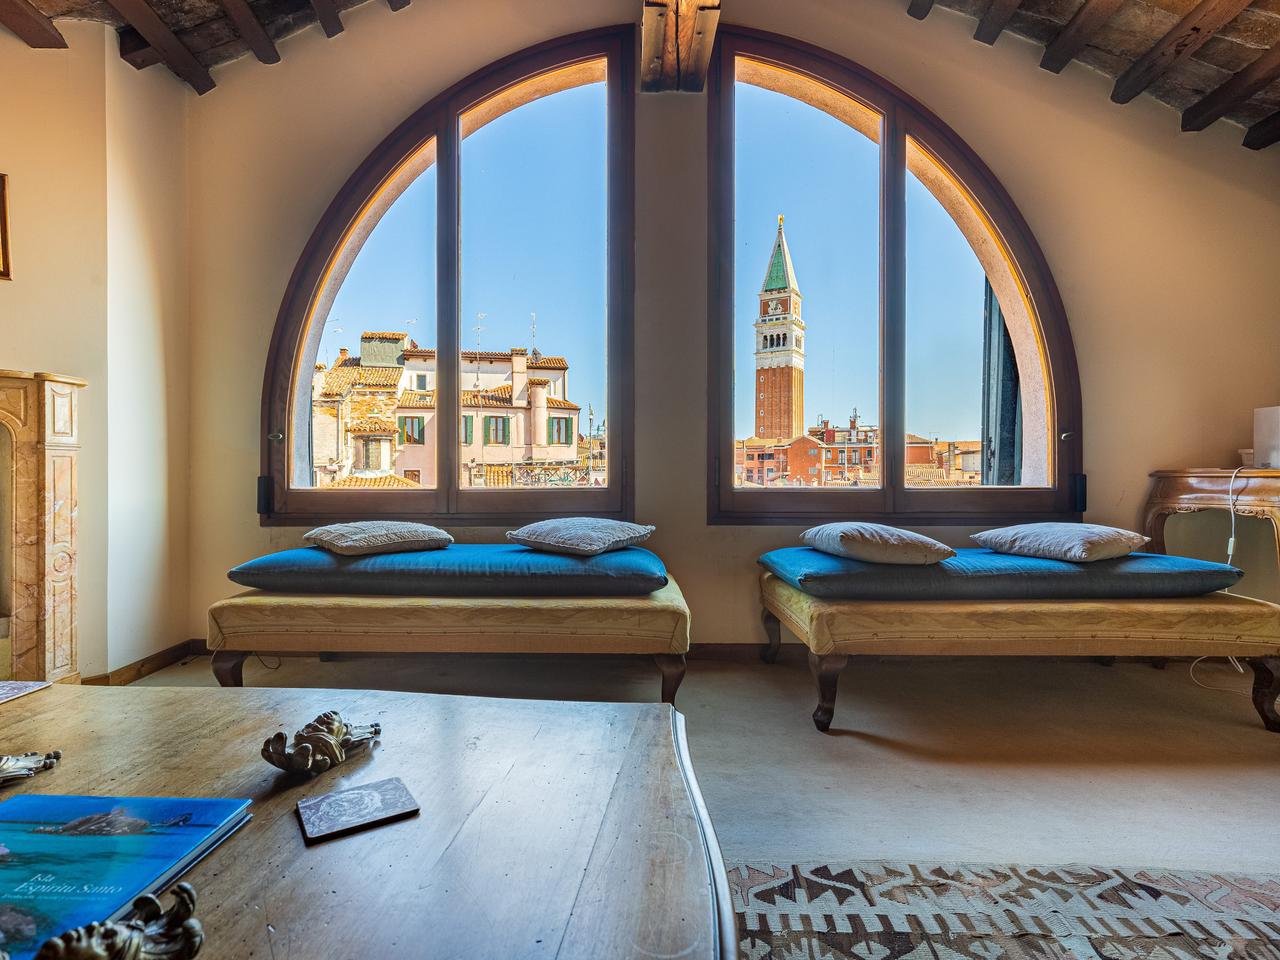 The penthouse overlooks the famous Piazza San Marco.